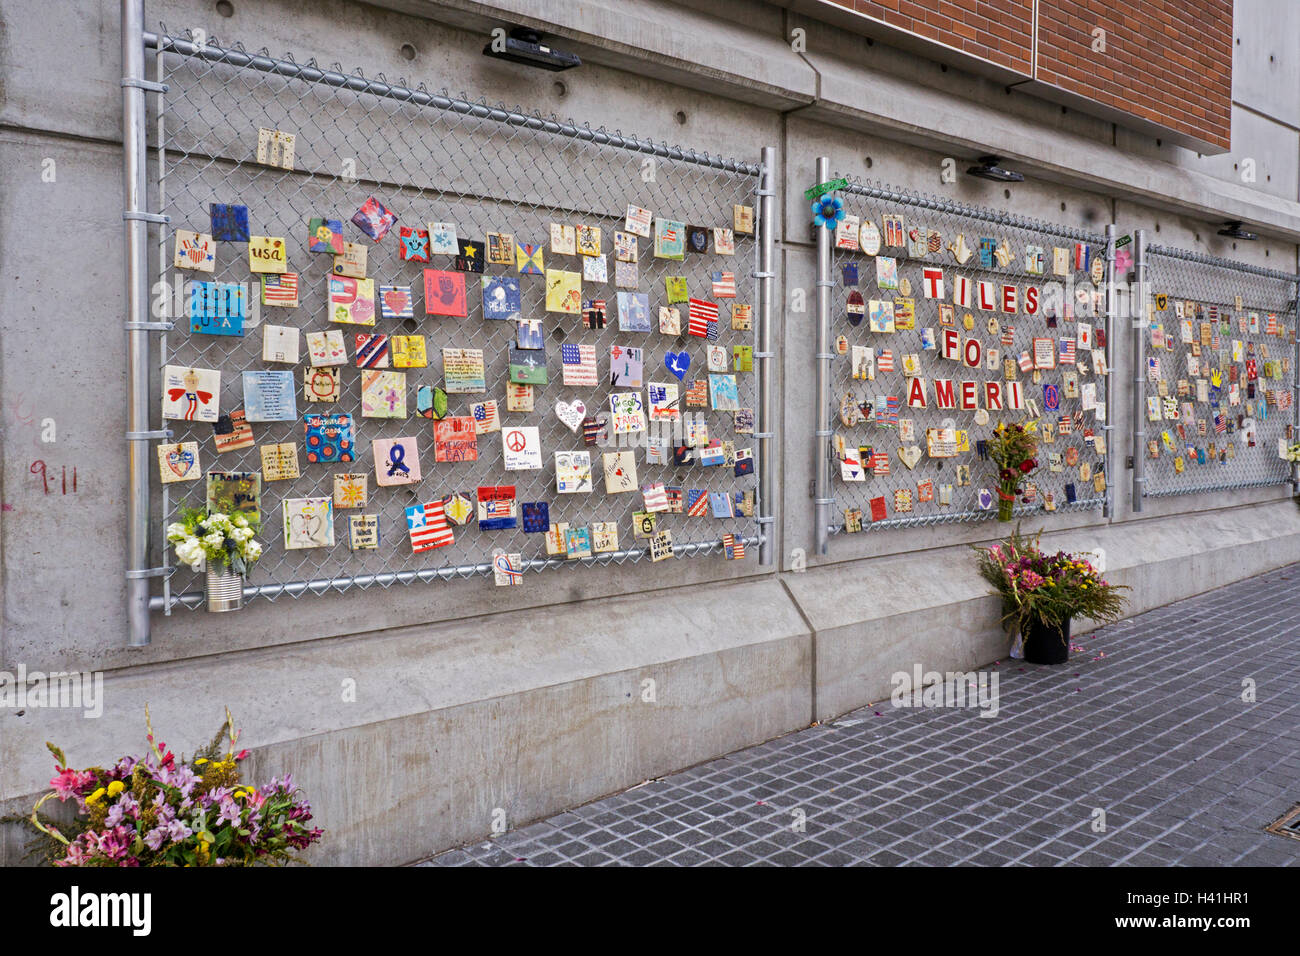 TILES FOR AMERICA. A display of small tiles in a fence commemorating the losses of 9/11. On 7th Ave in the West Village, NYC. Stock Photo